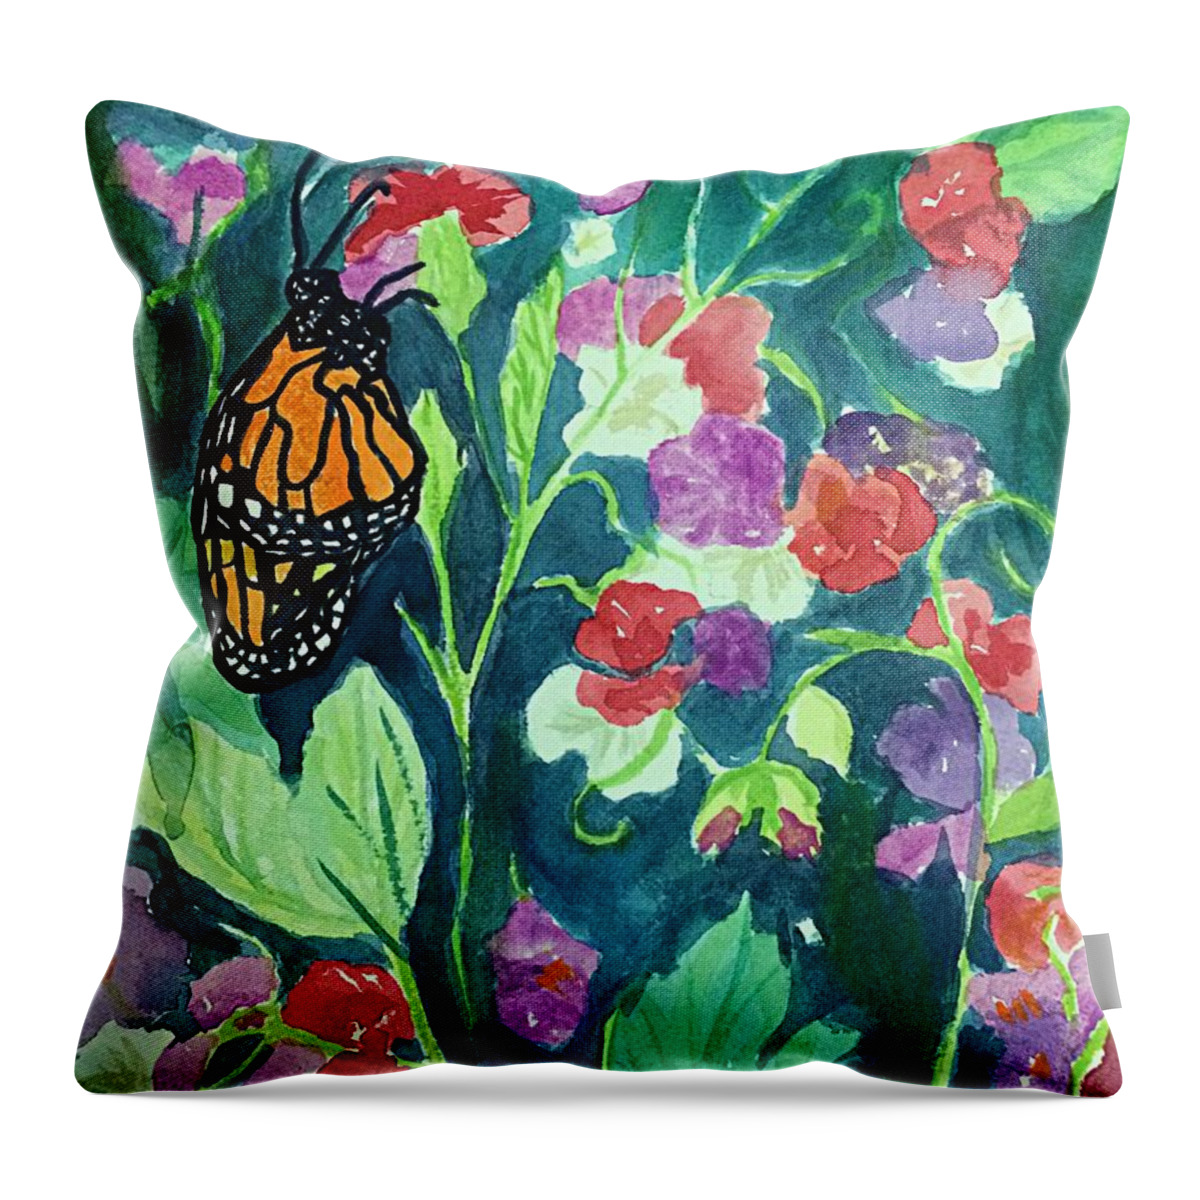 Monarch Butterfly Throw Pillow featuring the painting Monarch Butterfly Amid Sweetpeas by Ellen Levinson